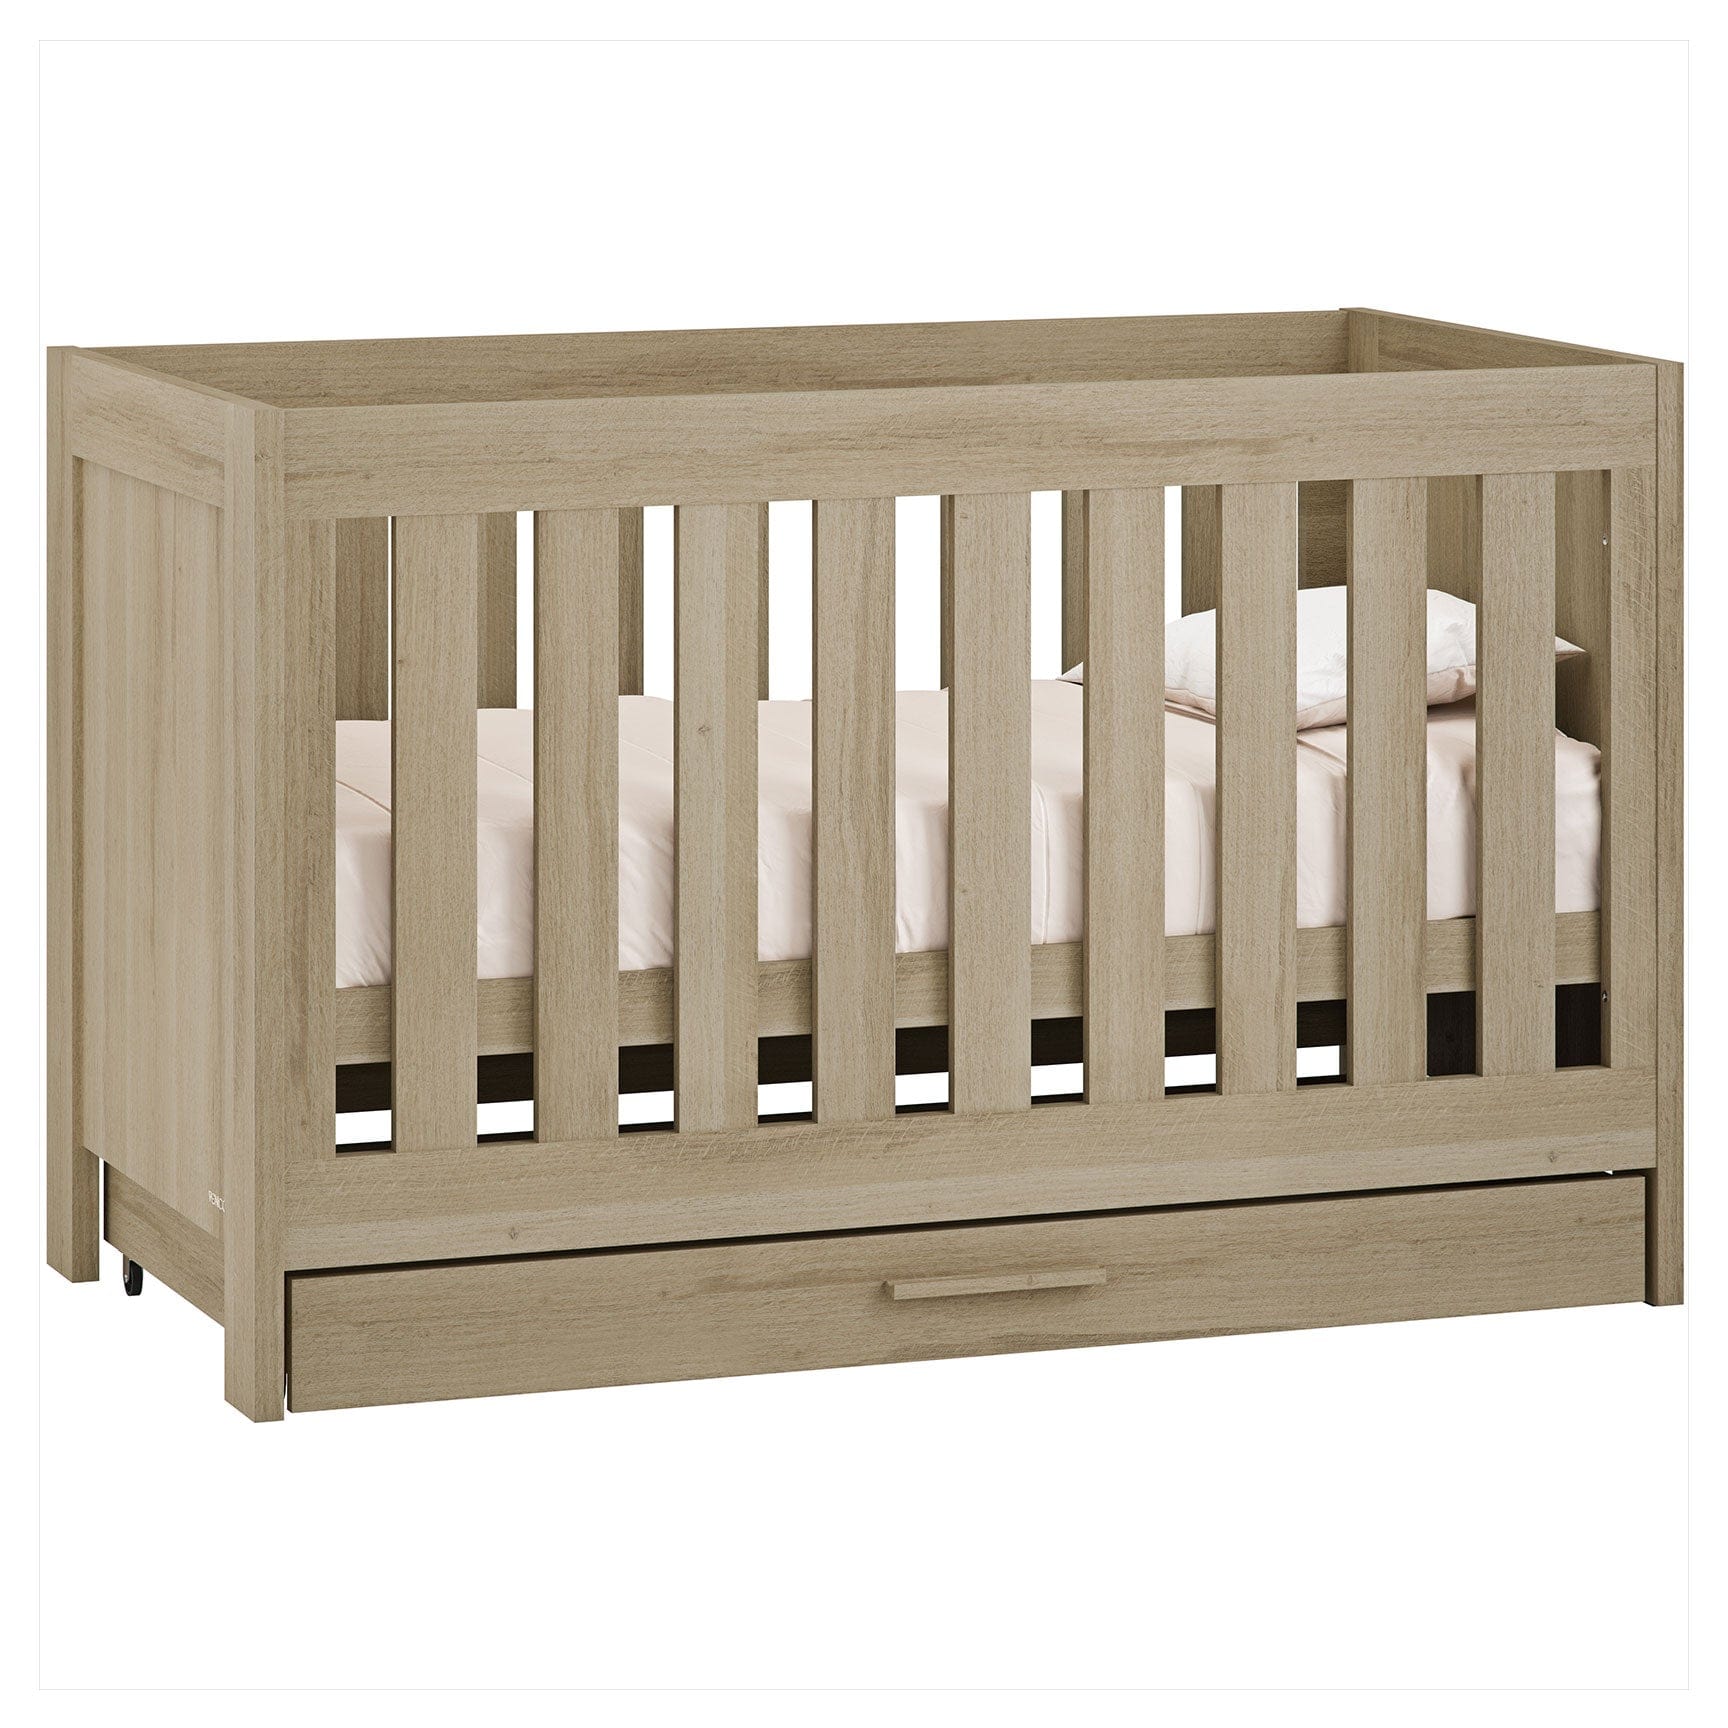 Venicci Forenzo Cot Bed with Drawer in Honey Oak Cot Beds